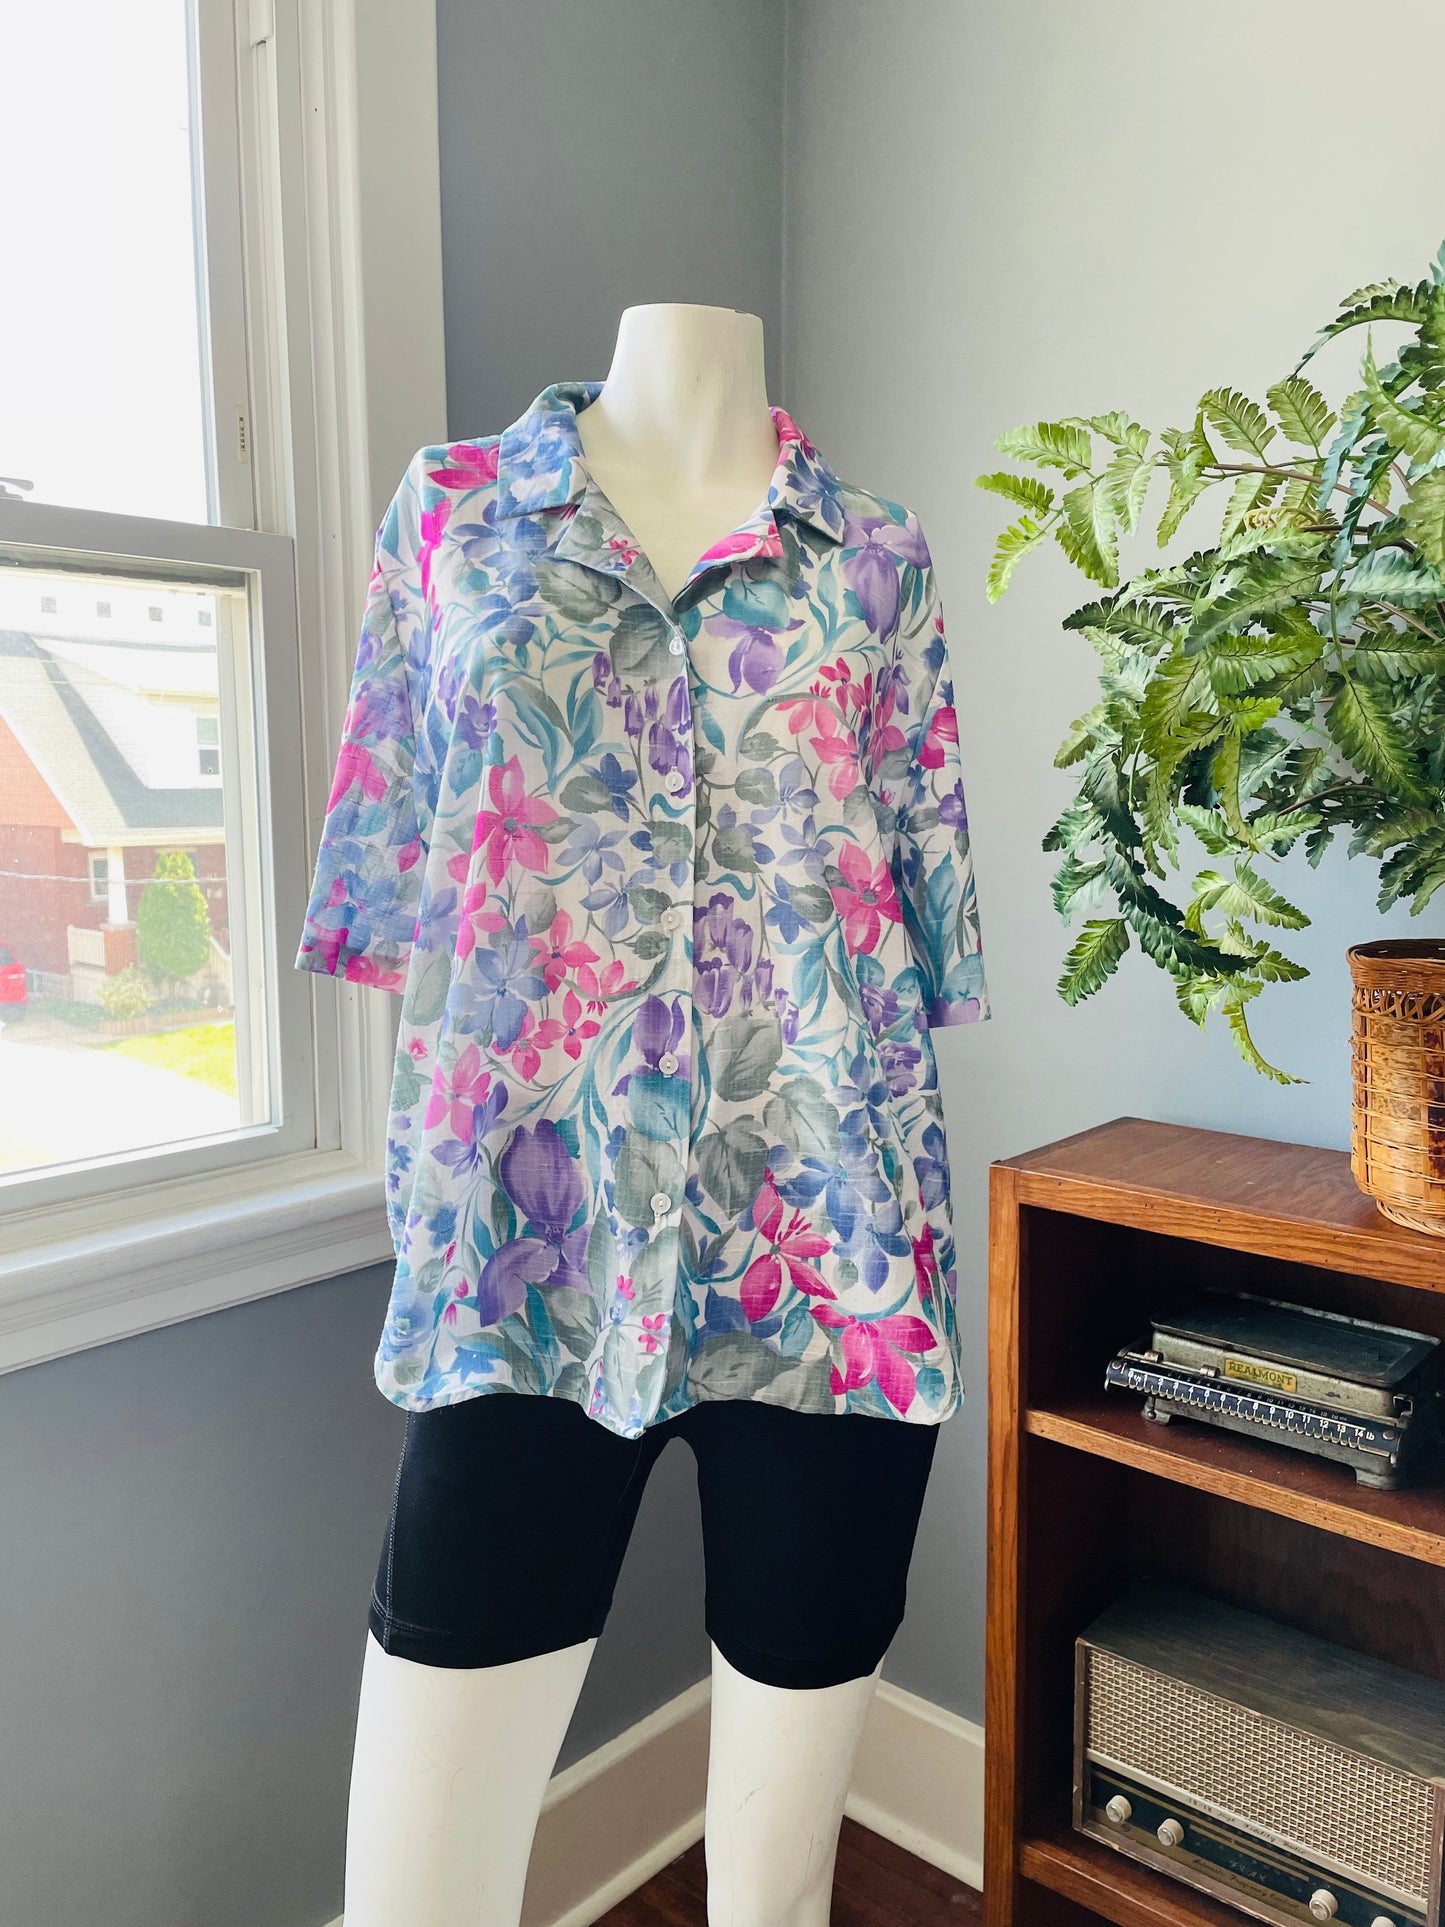 Vintage D’Aillard’s Button-Up Floral T-Shirt or Beach Cover-Up